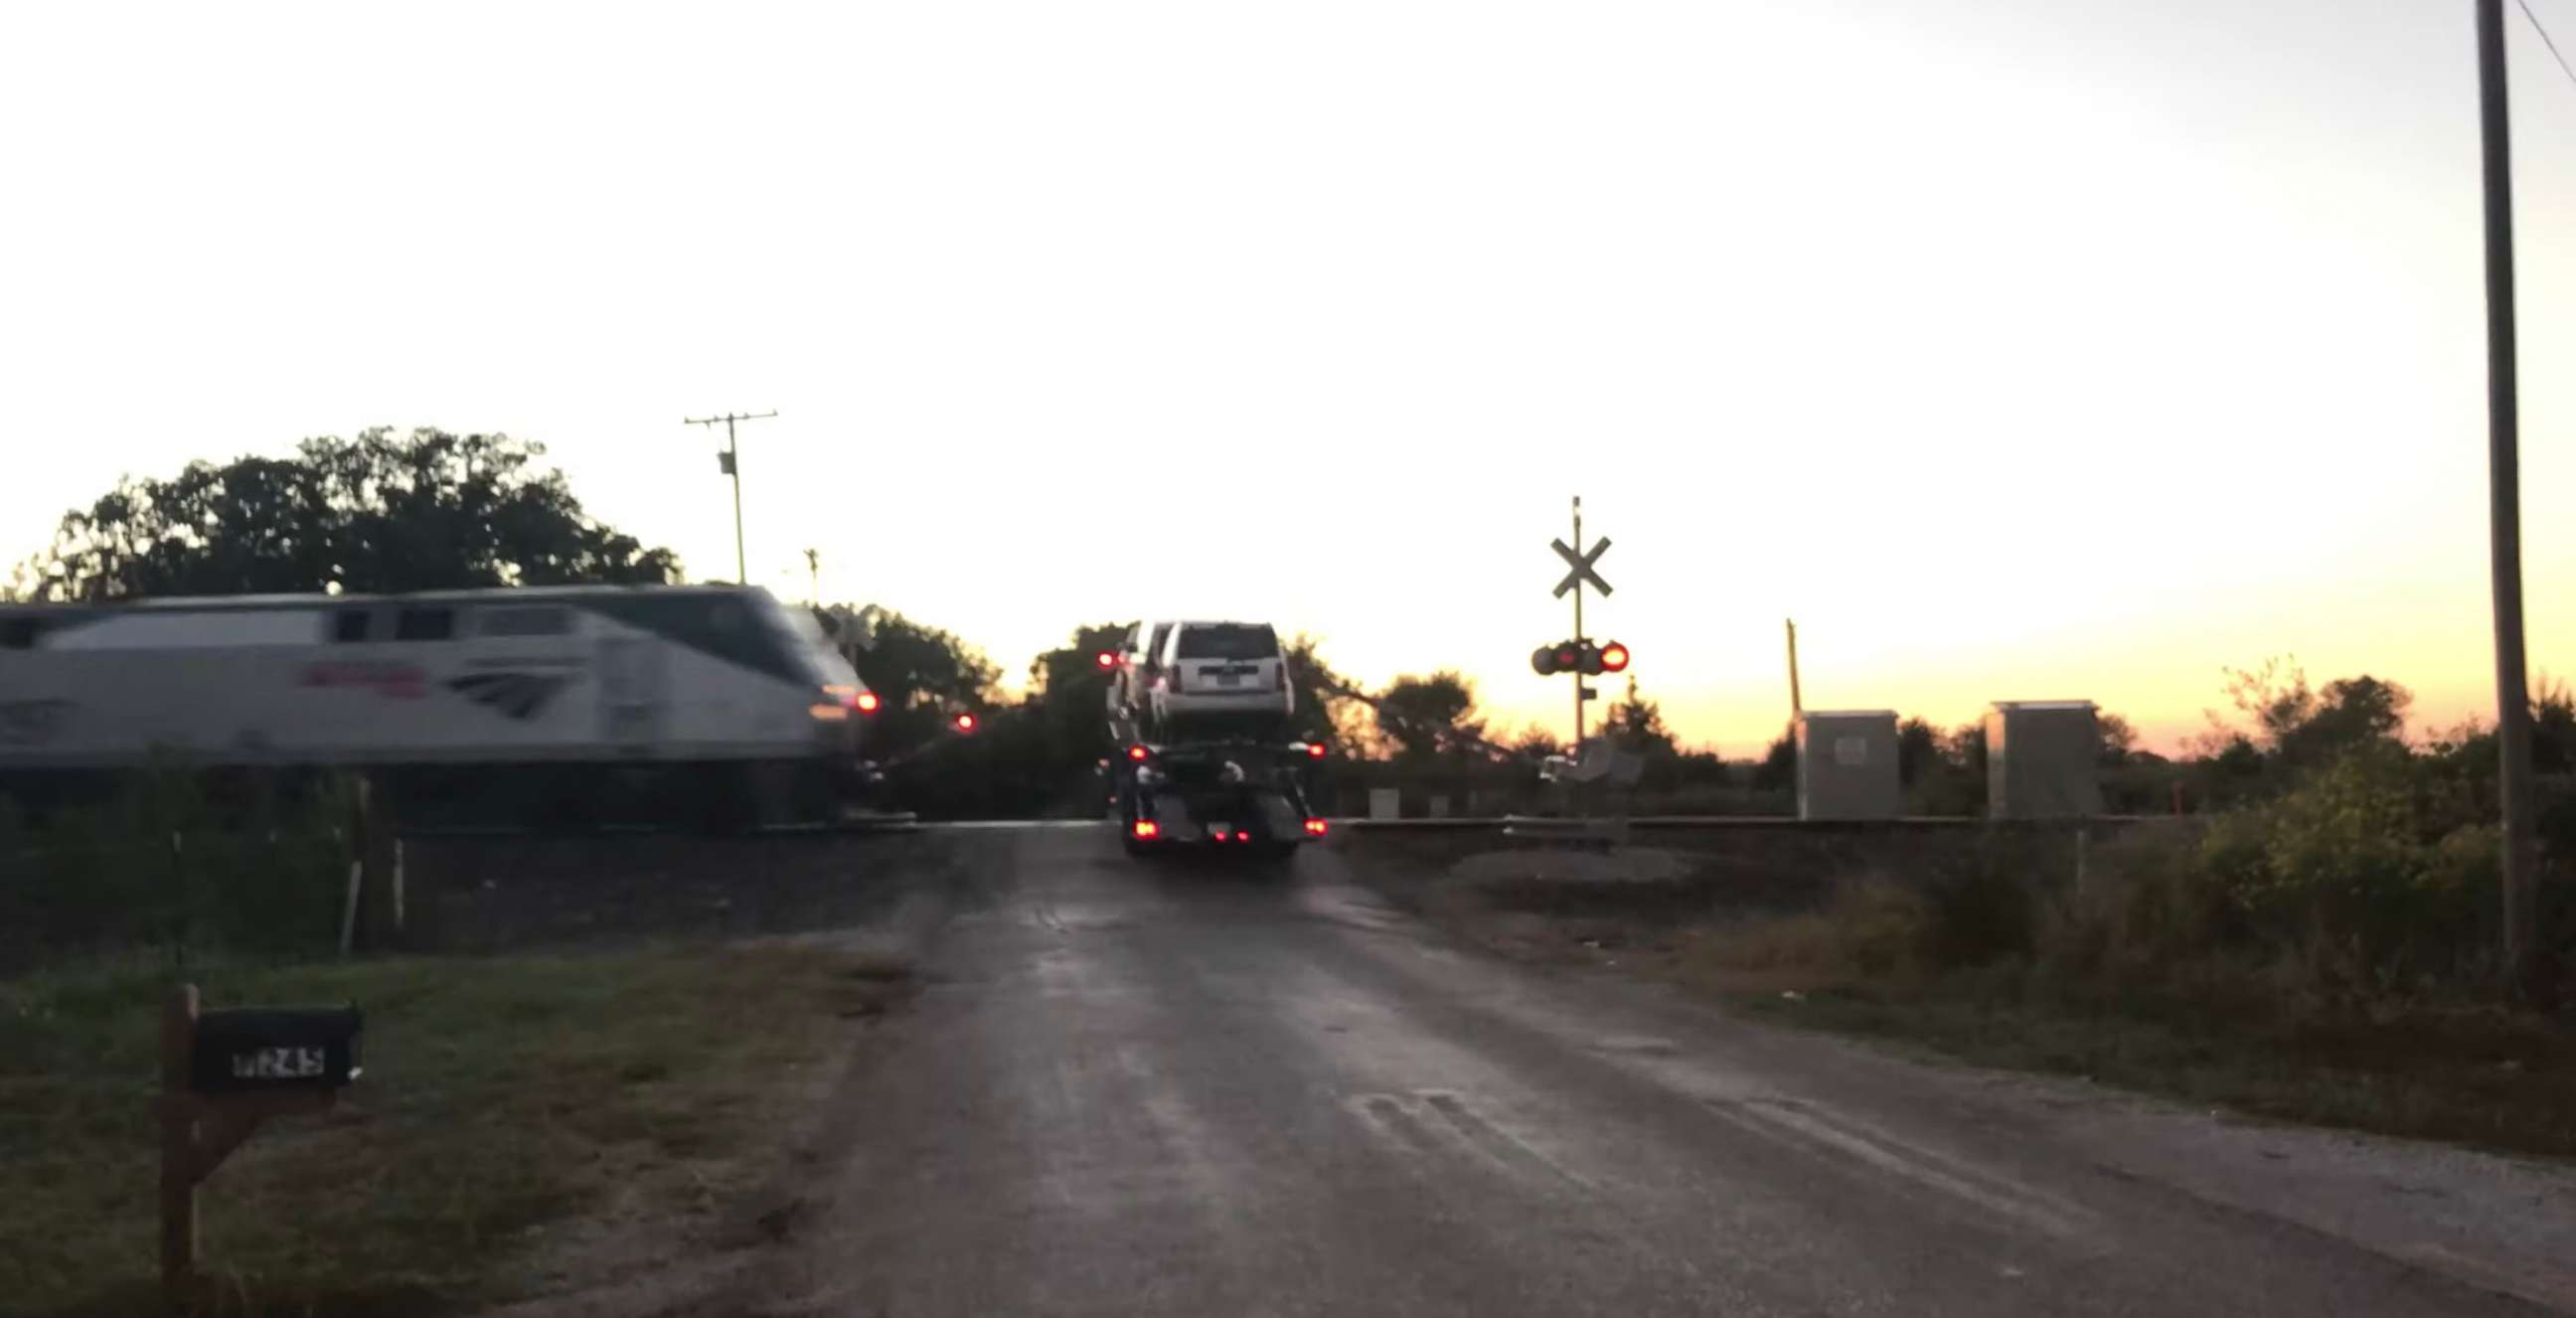 PHOTO: A still from a bystander's video taken right before an Amtrak train collided with a car hauler semi-truck in Thackerville, Oklahoma, on Oct. 15, 2021.